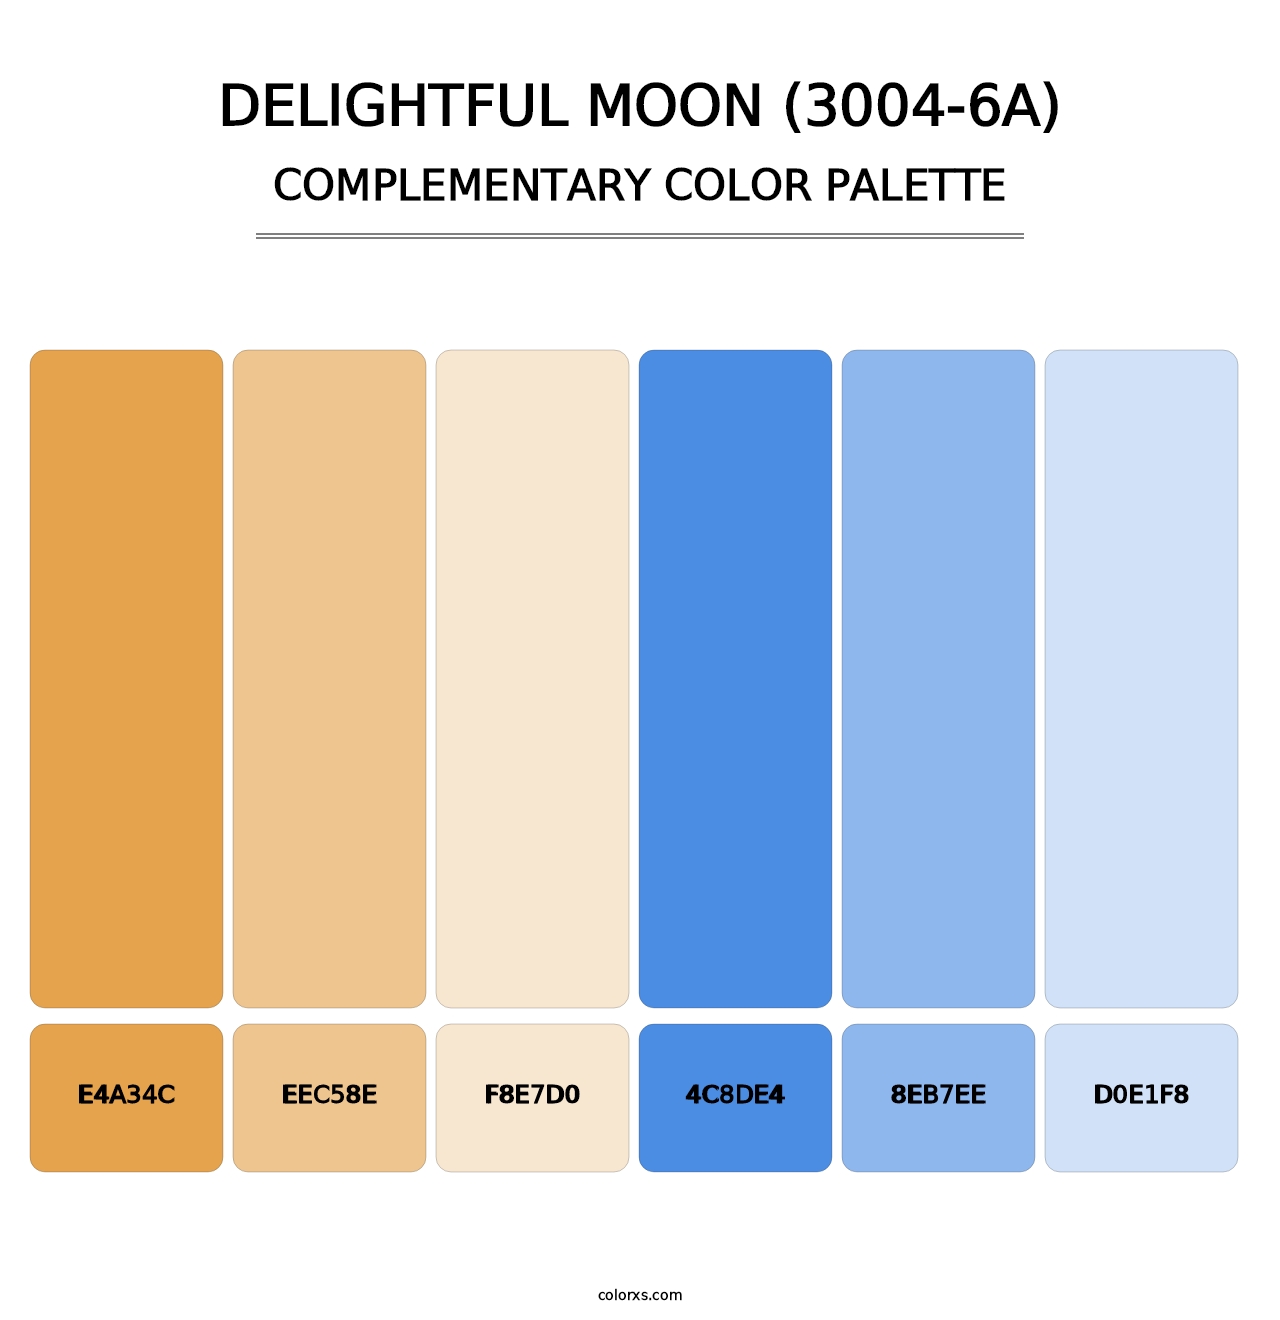 Delightful Moon (3004-6A) - Complementary Color Palette